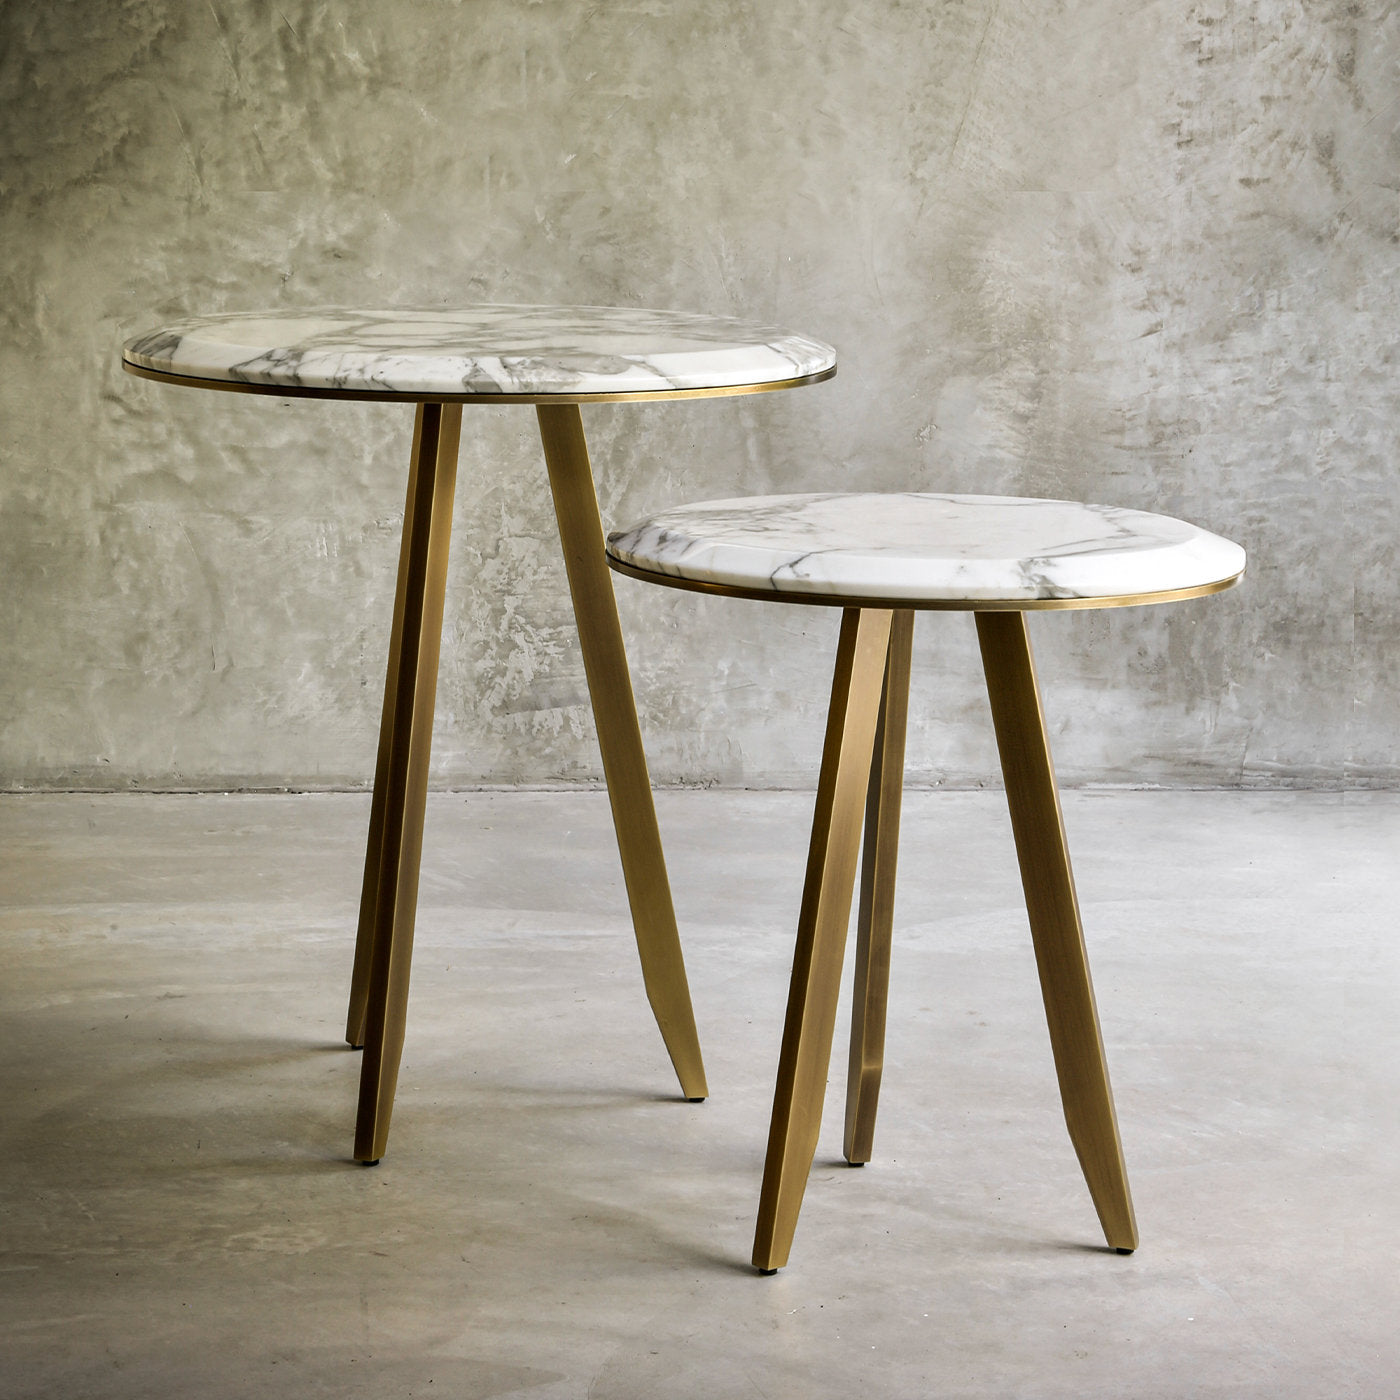 Mirage Small Side Table by Bosco Fair - Alternative view 1